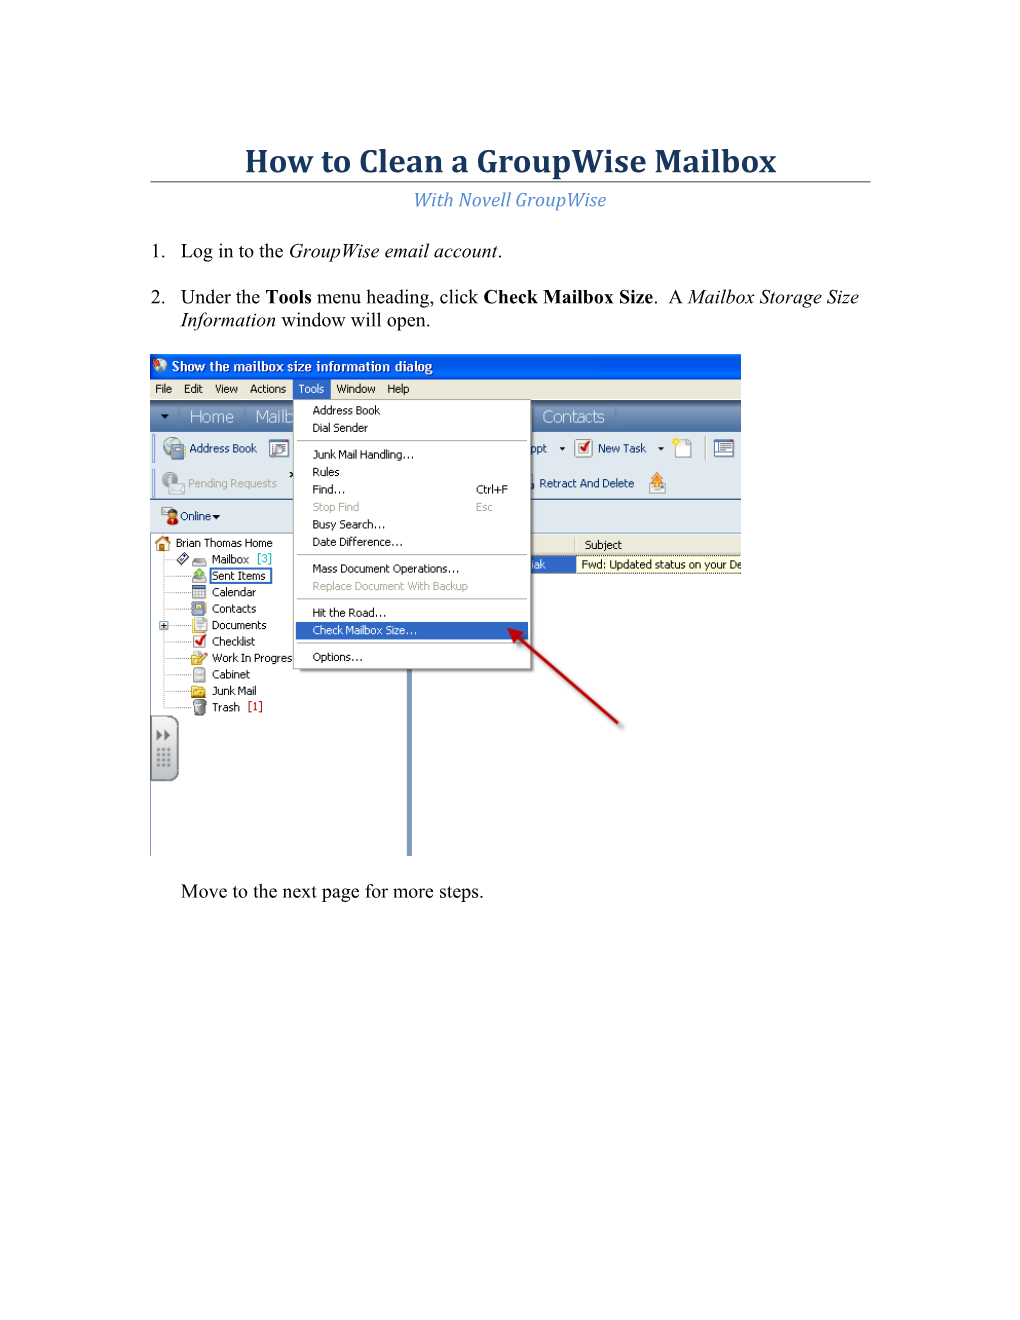 How to Clean up a Groupwise Mailbox